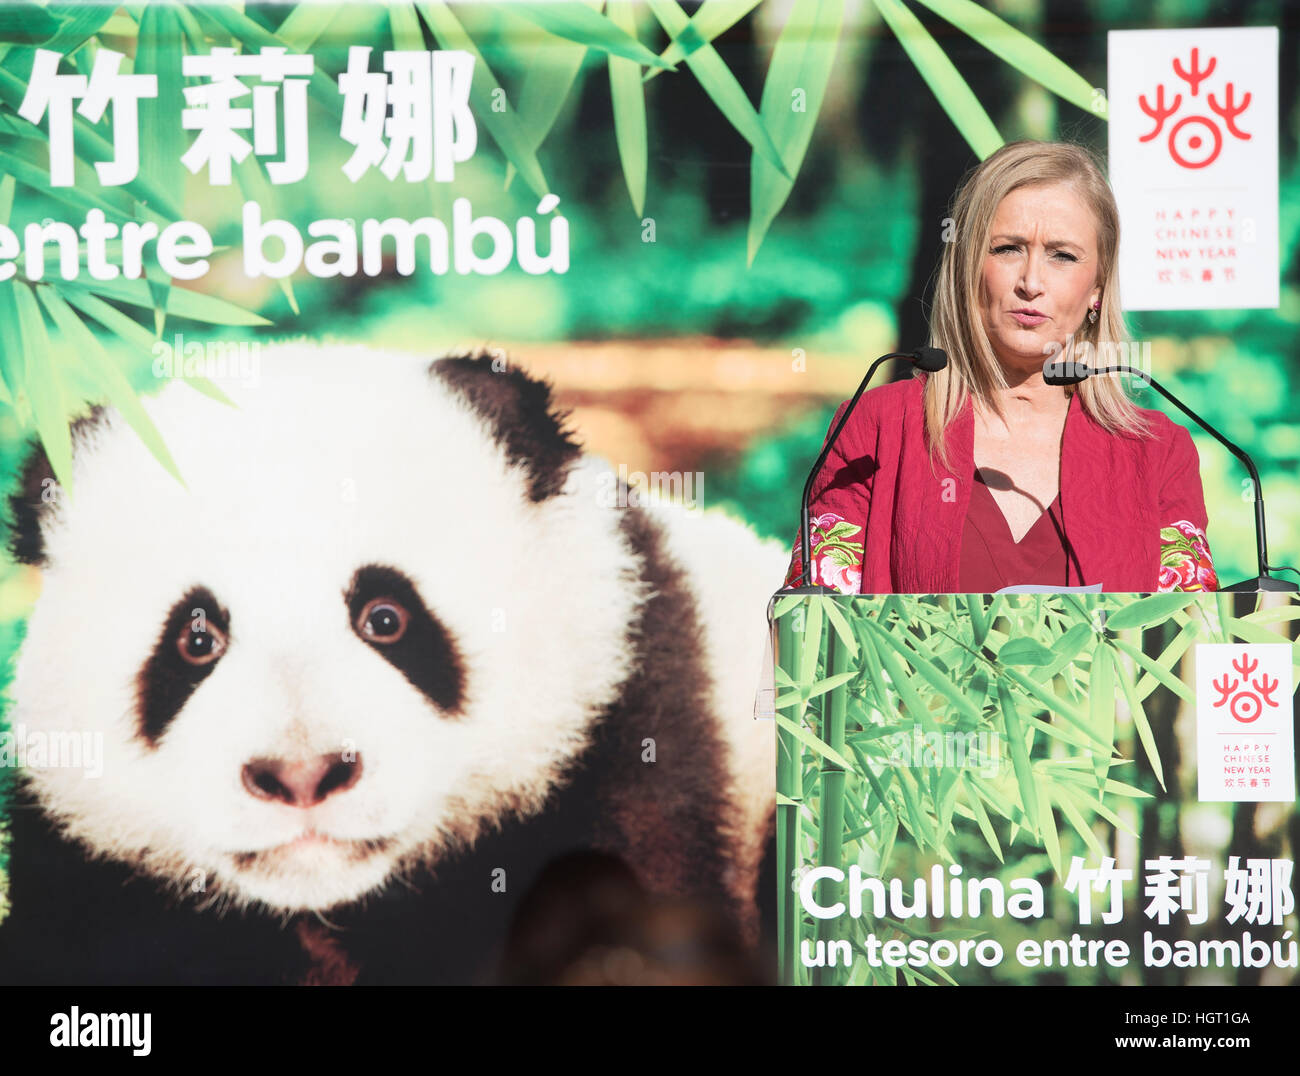 (170113) -- MADRID, Jan. 13, 2017 (Xinhua) -- Cristina Cifuentes, president of the community of Madrid, attends a naming ceremony for a giant panda cub at the Zoo Aquarium in Madrid, Spain, on Jan. 12, 2017. The fifth giant panda cub born in the Zoo Aquarium in Madrid was given the name Chulina on Thursday. The panda cub was officially presented to the public and press in a ceremony organized by the Chinese embassy in Spain and the zoo. It is the first female cub born at the Zoo Aquarium. (Xinhua/Eduardo) (zy) Stock Photo